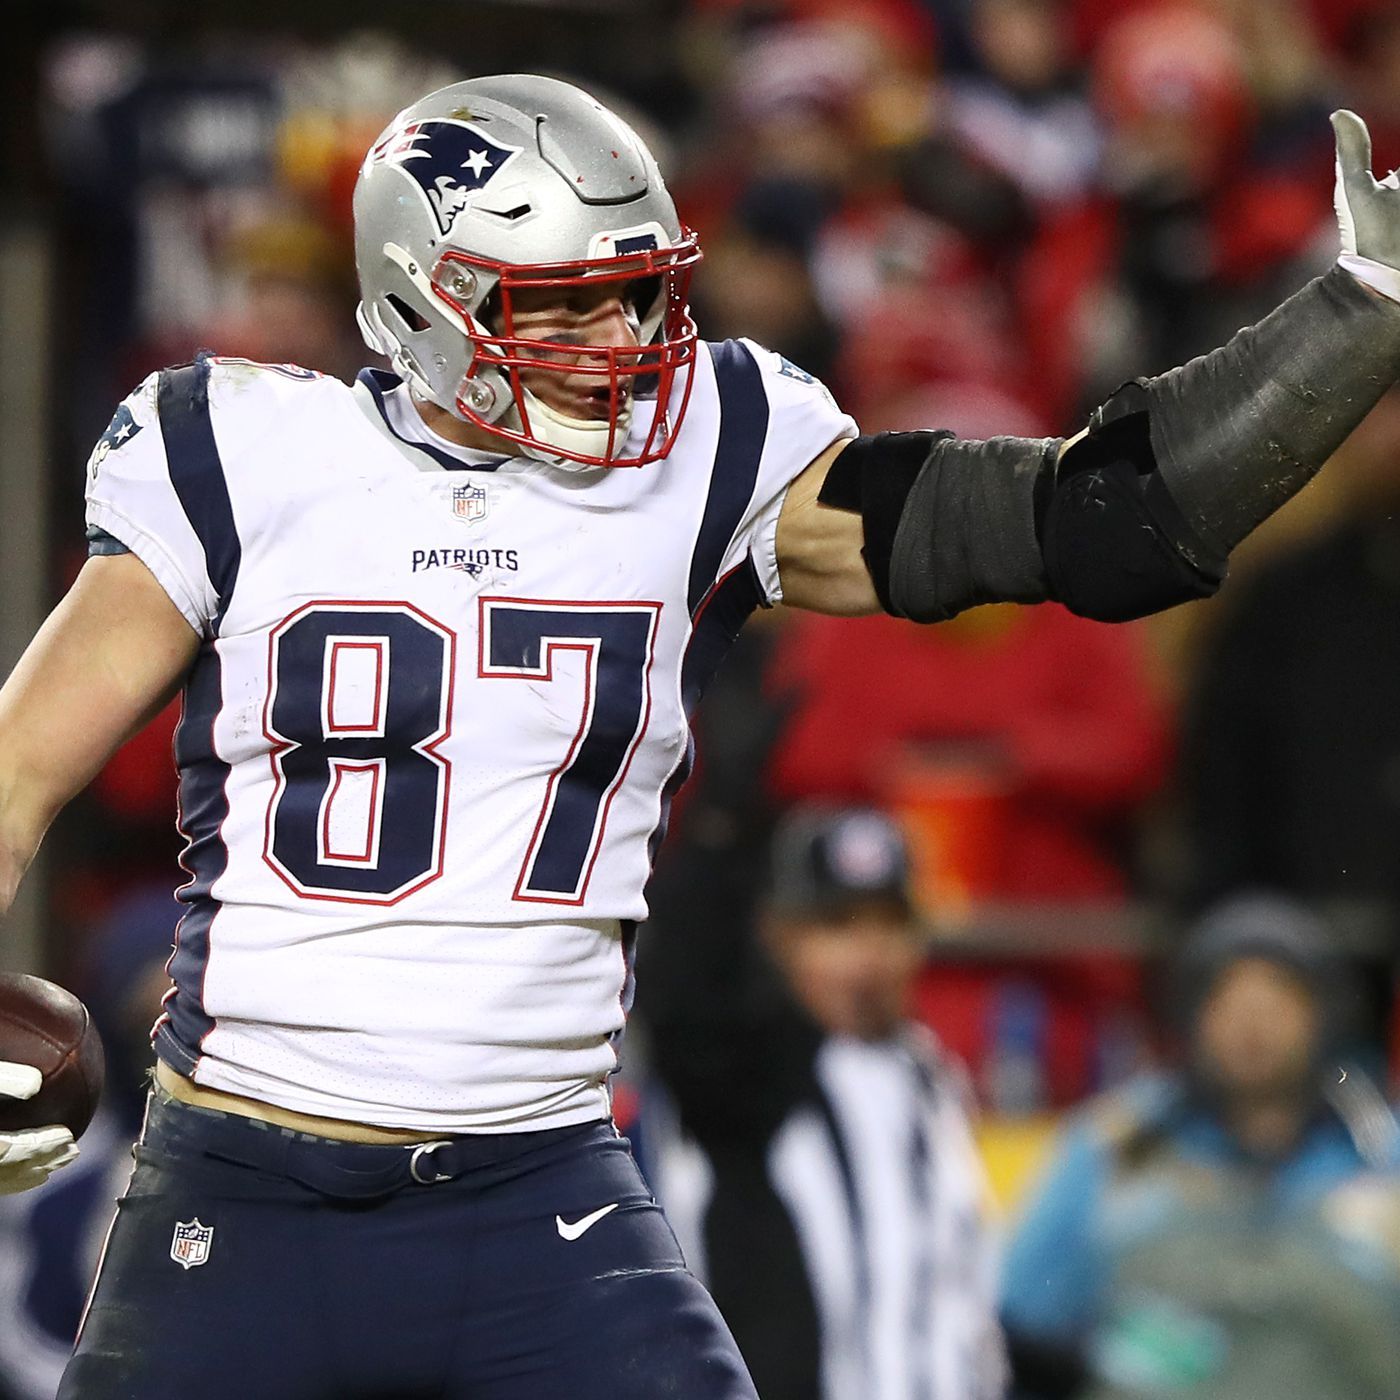 Rob Gronkowski retires with 3 Super Bowl rings. What's next for Patriots?